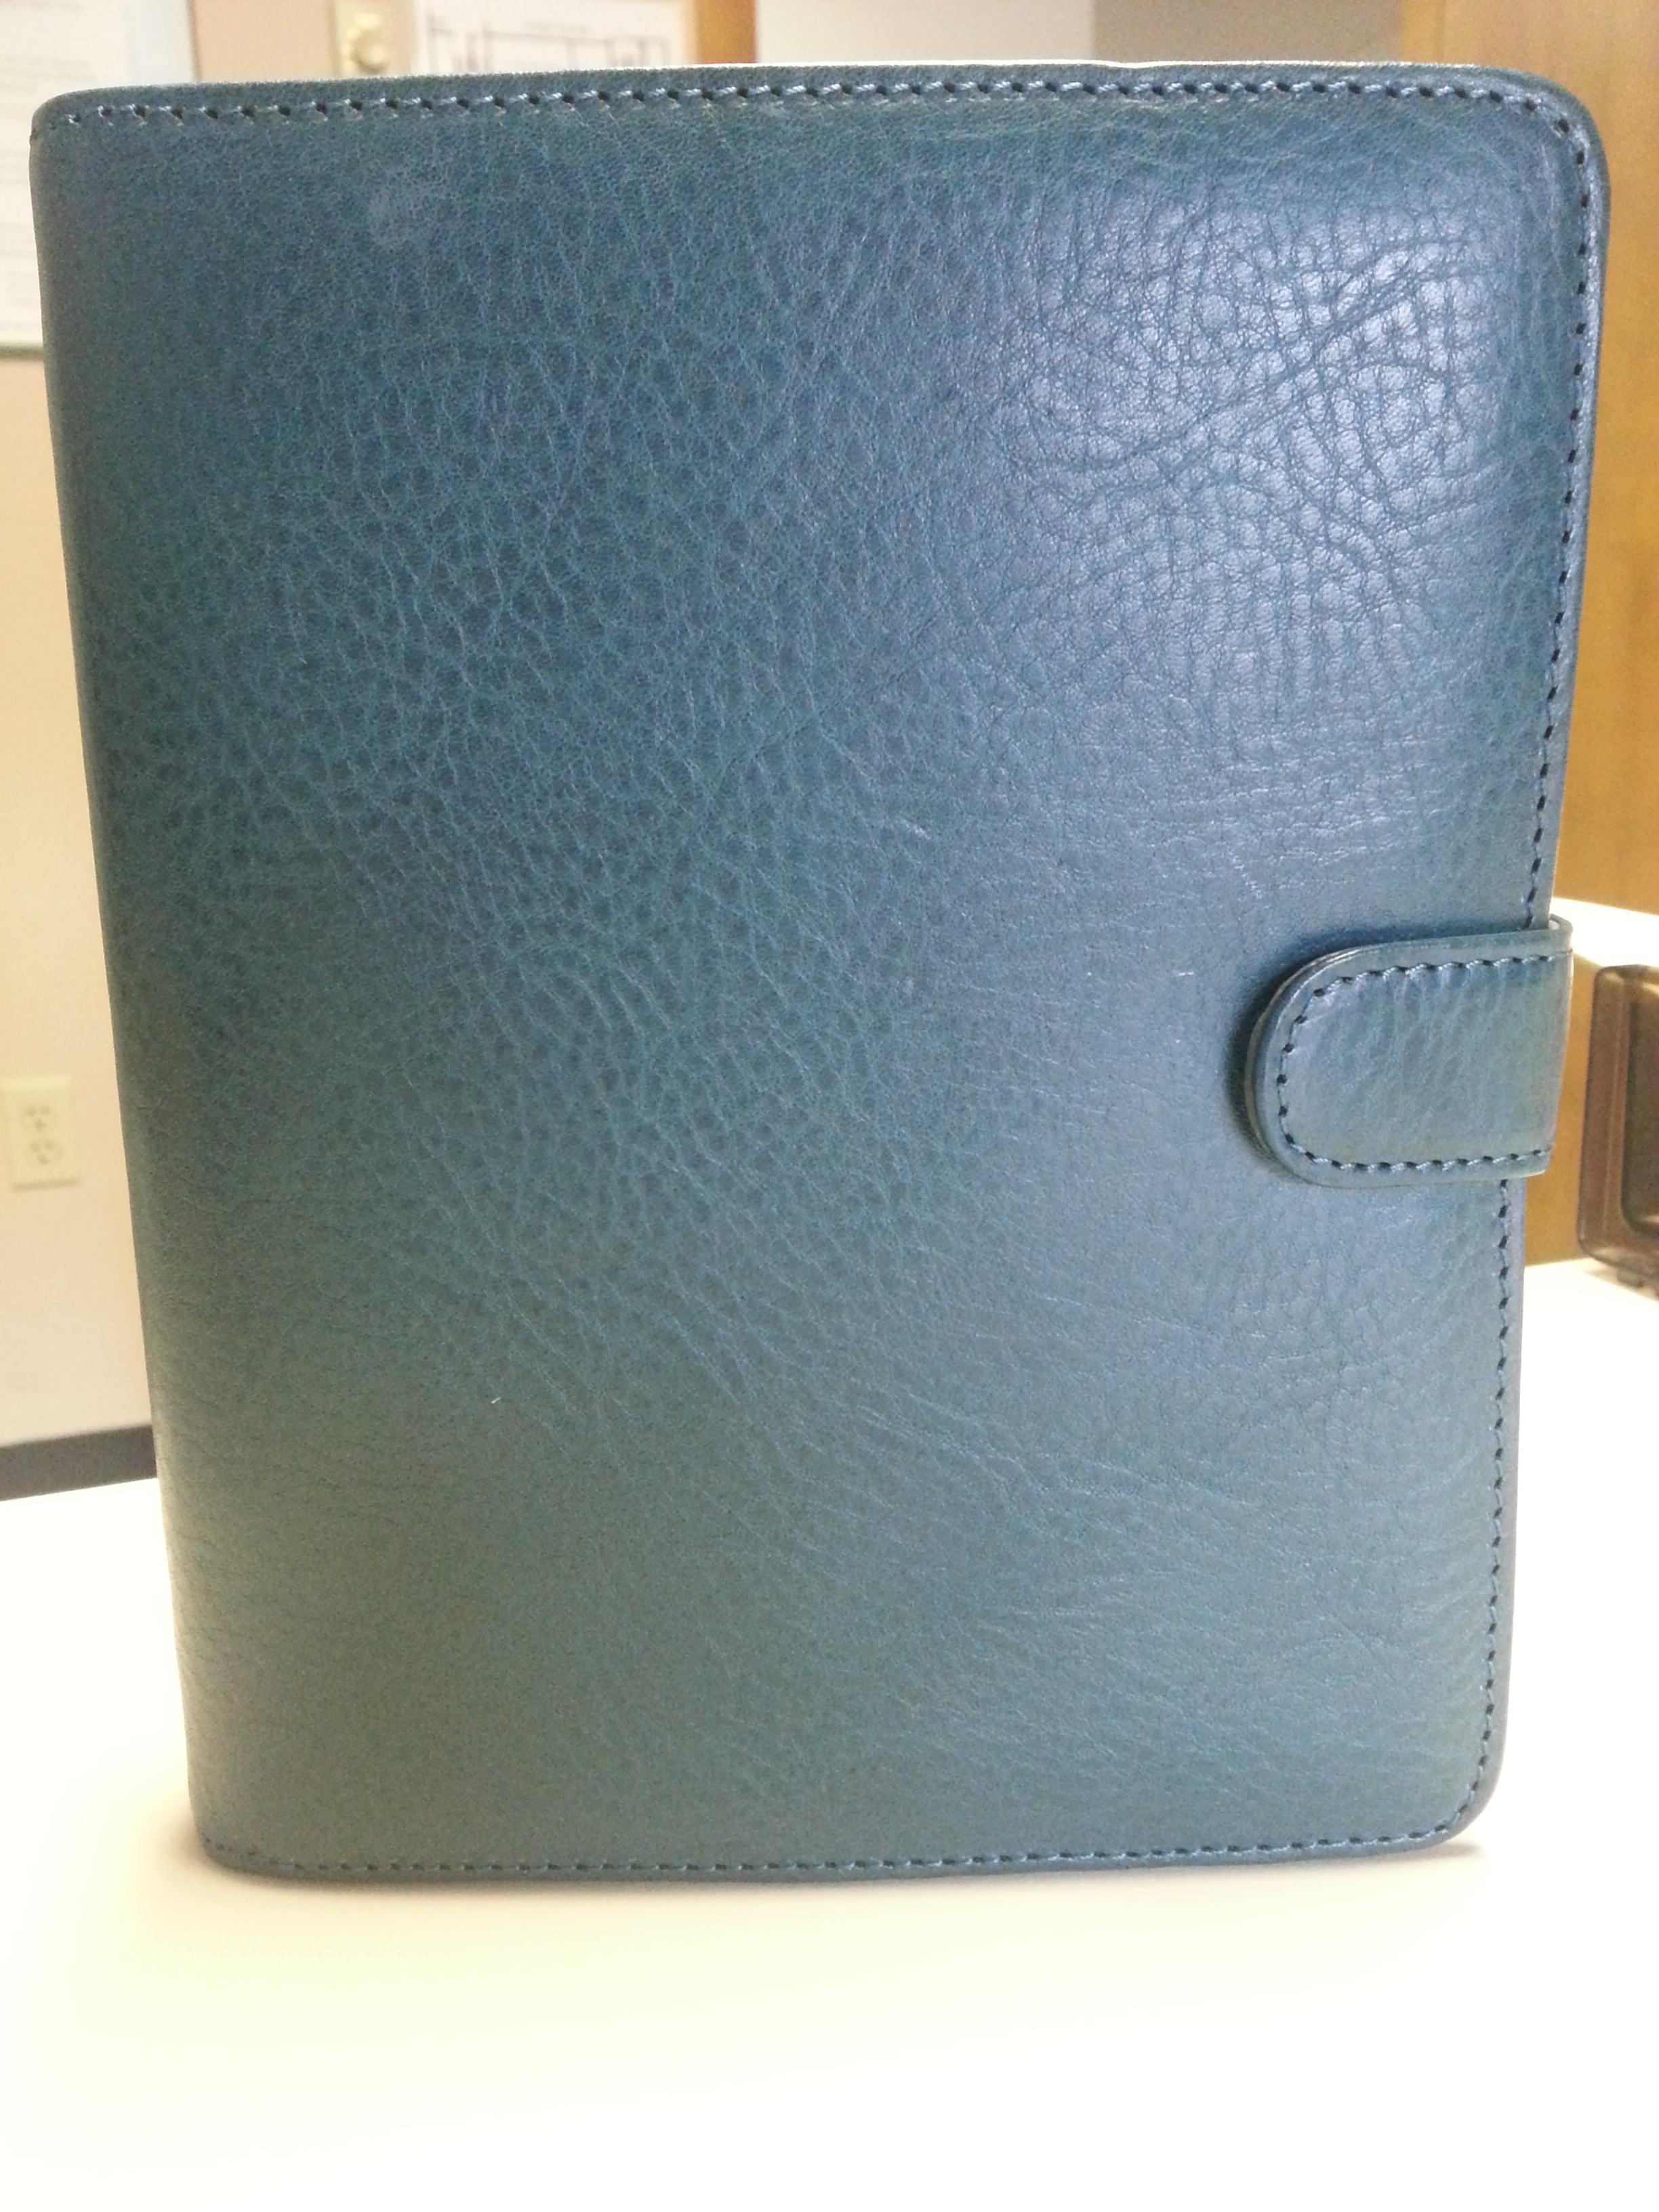 Franklin Covey Compact Planner Organizer Purse Leather Binder 